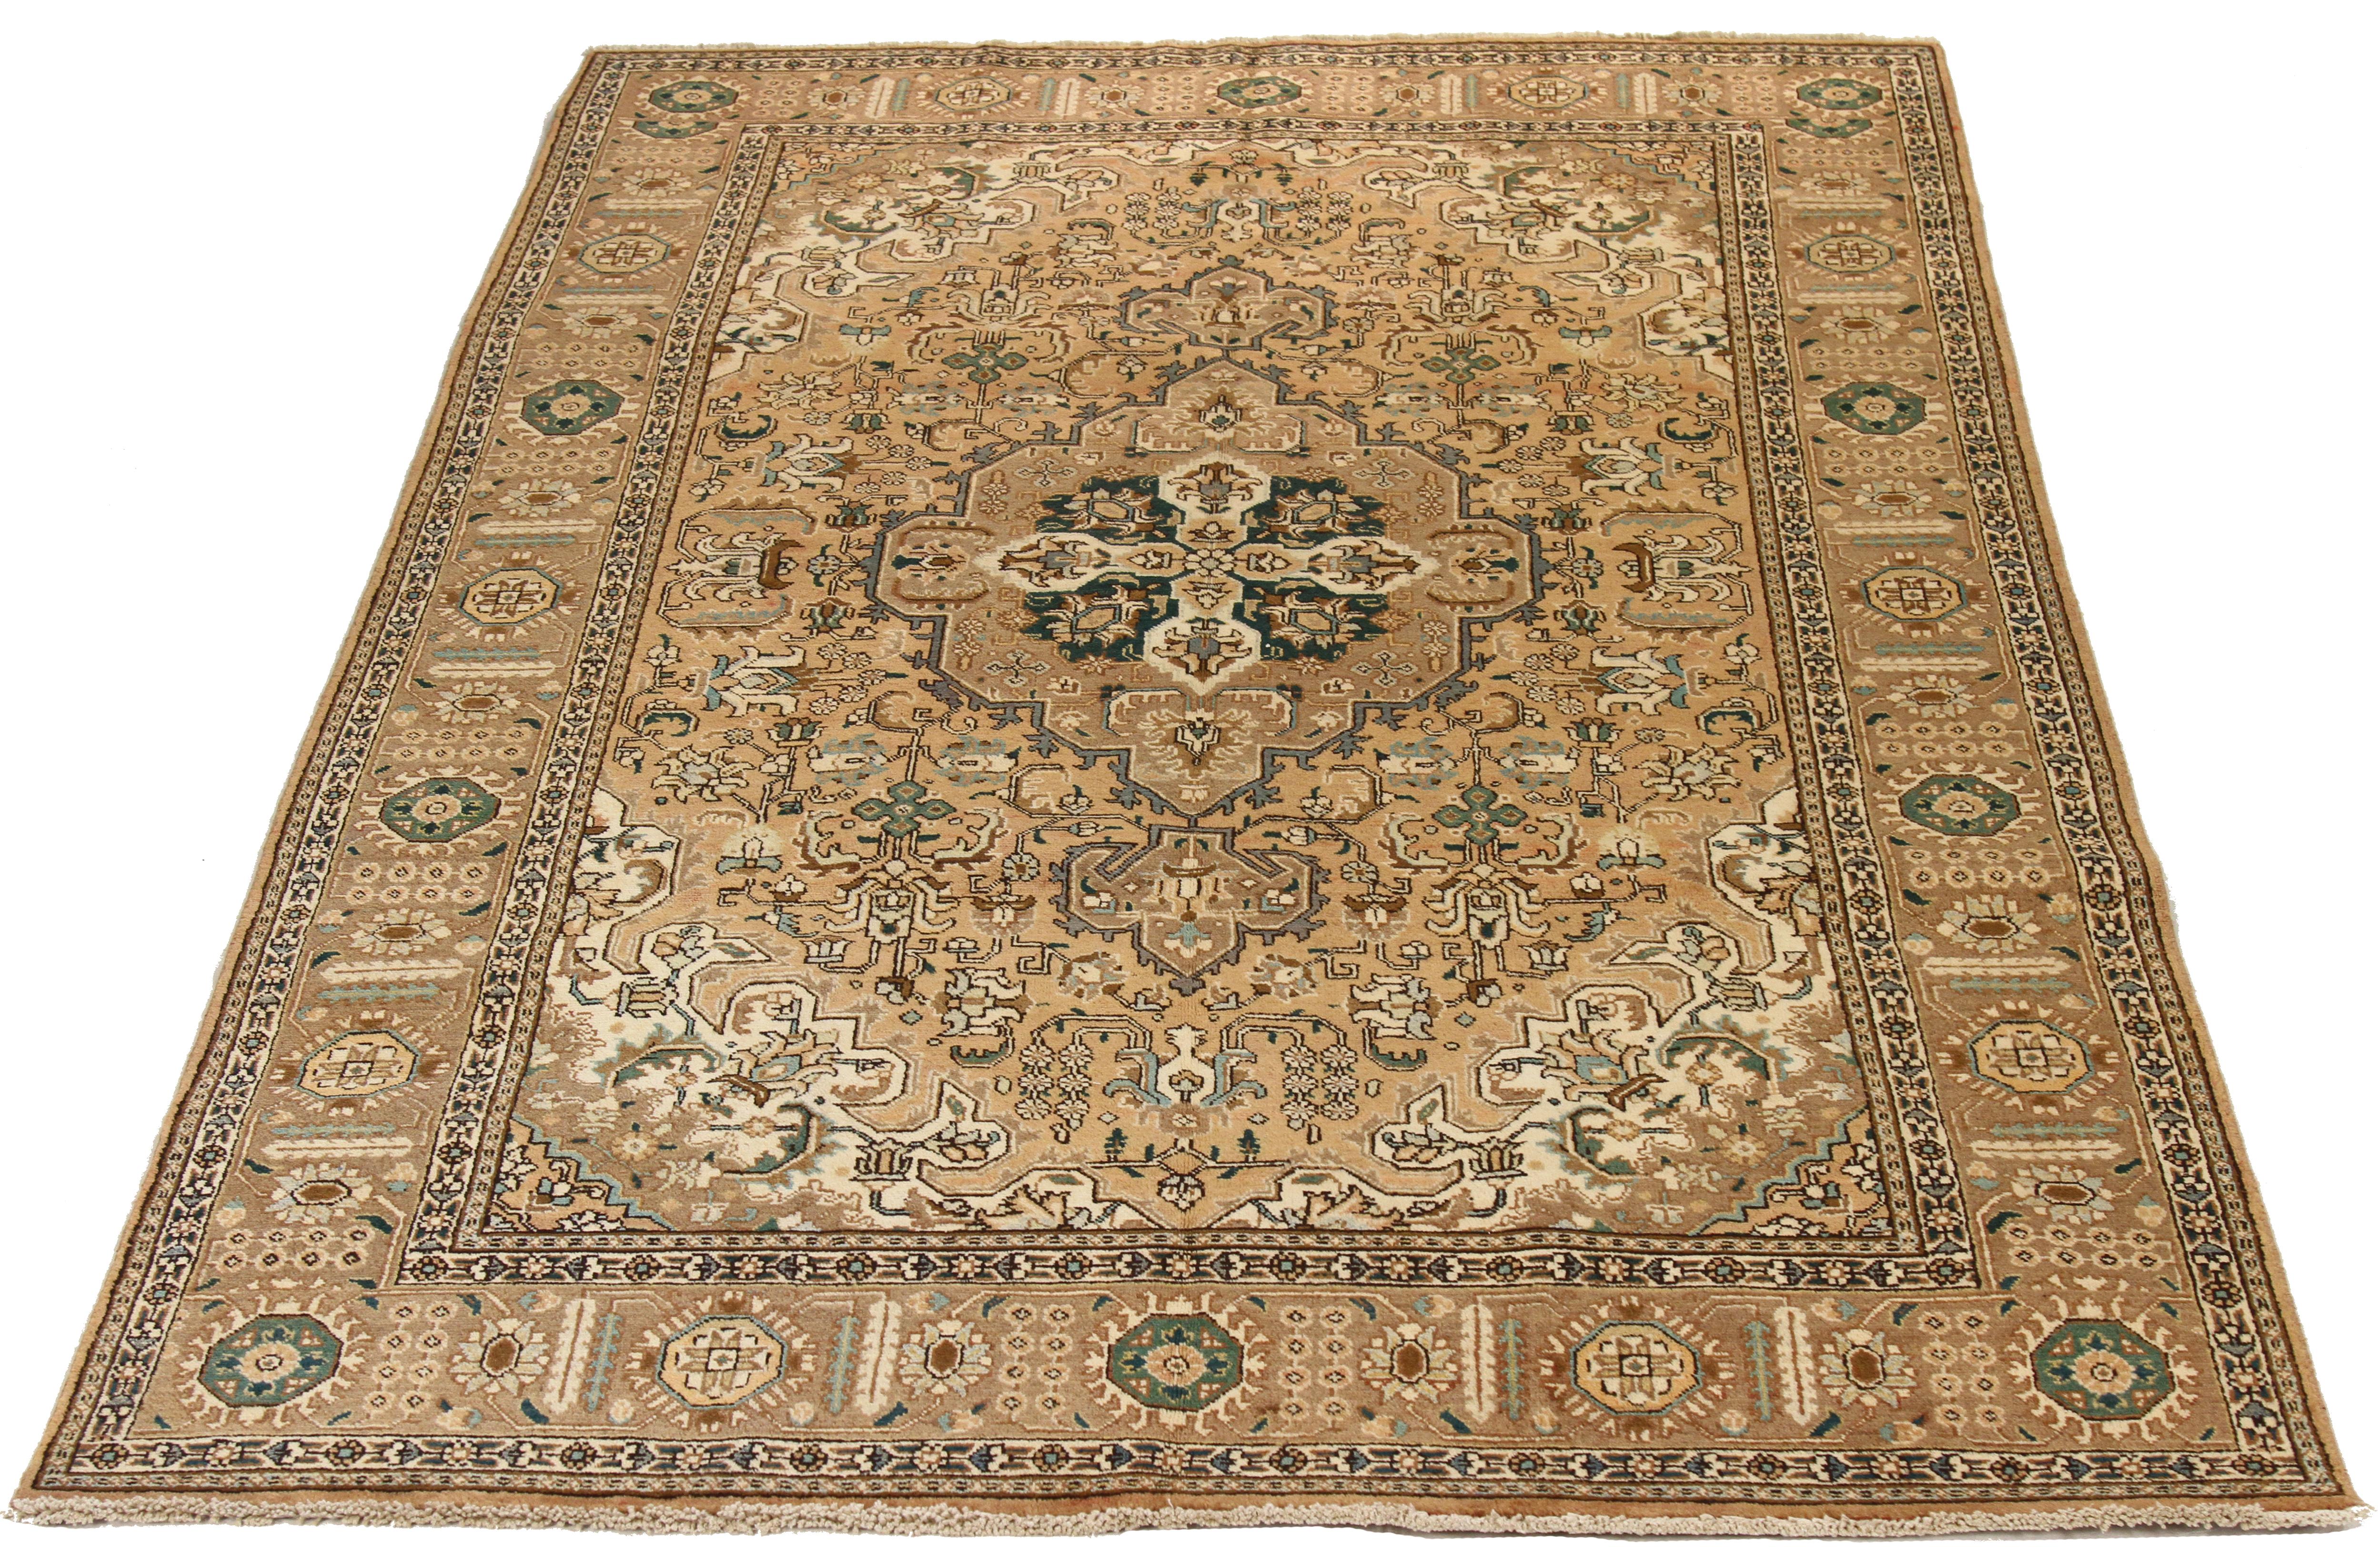 Mid-20th century handwoven Persian area rug made from fine wool and all-natural vegetable dyes that are safe for people and pets. This beautiful piece features ornate floral patterns in various colors which Heriz rugs are known for. Persian rugs